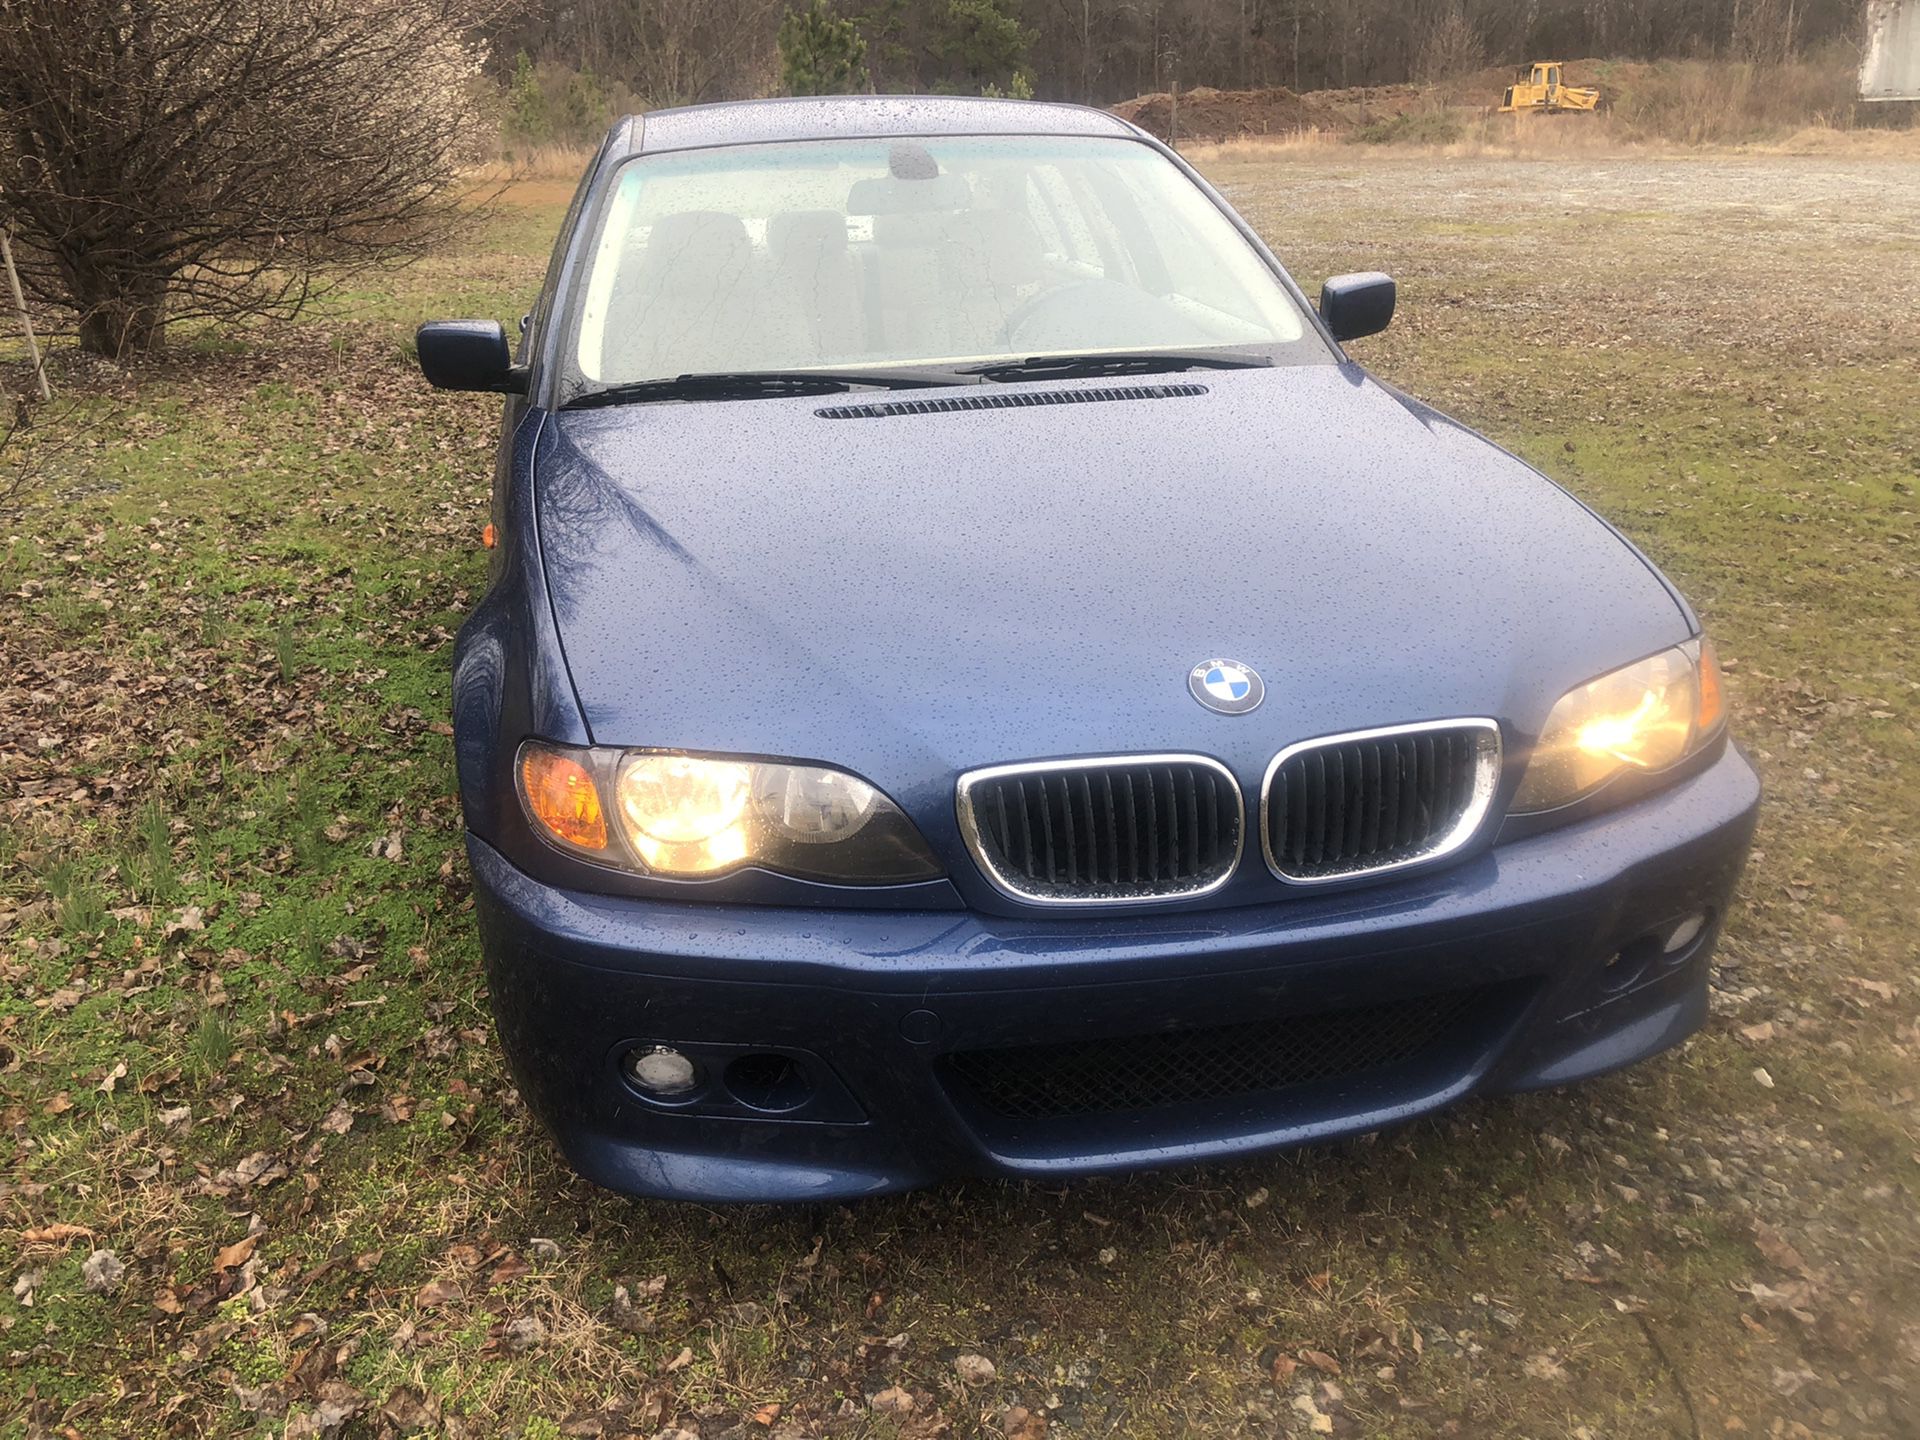 2004 bmw 325i 2.5 l 6 cyl leather seats run and drives good